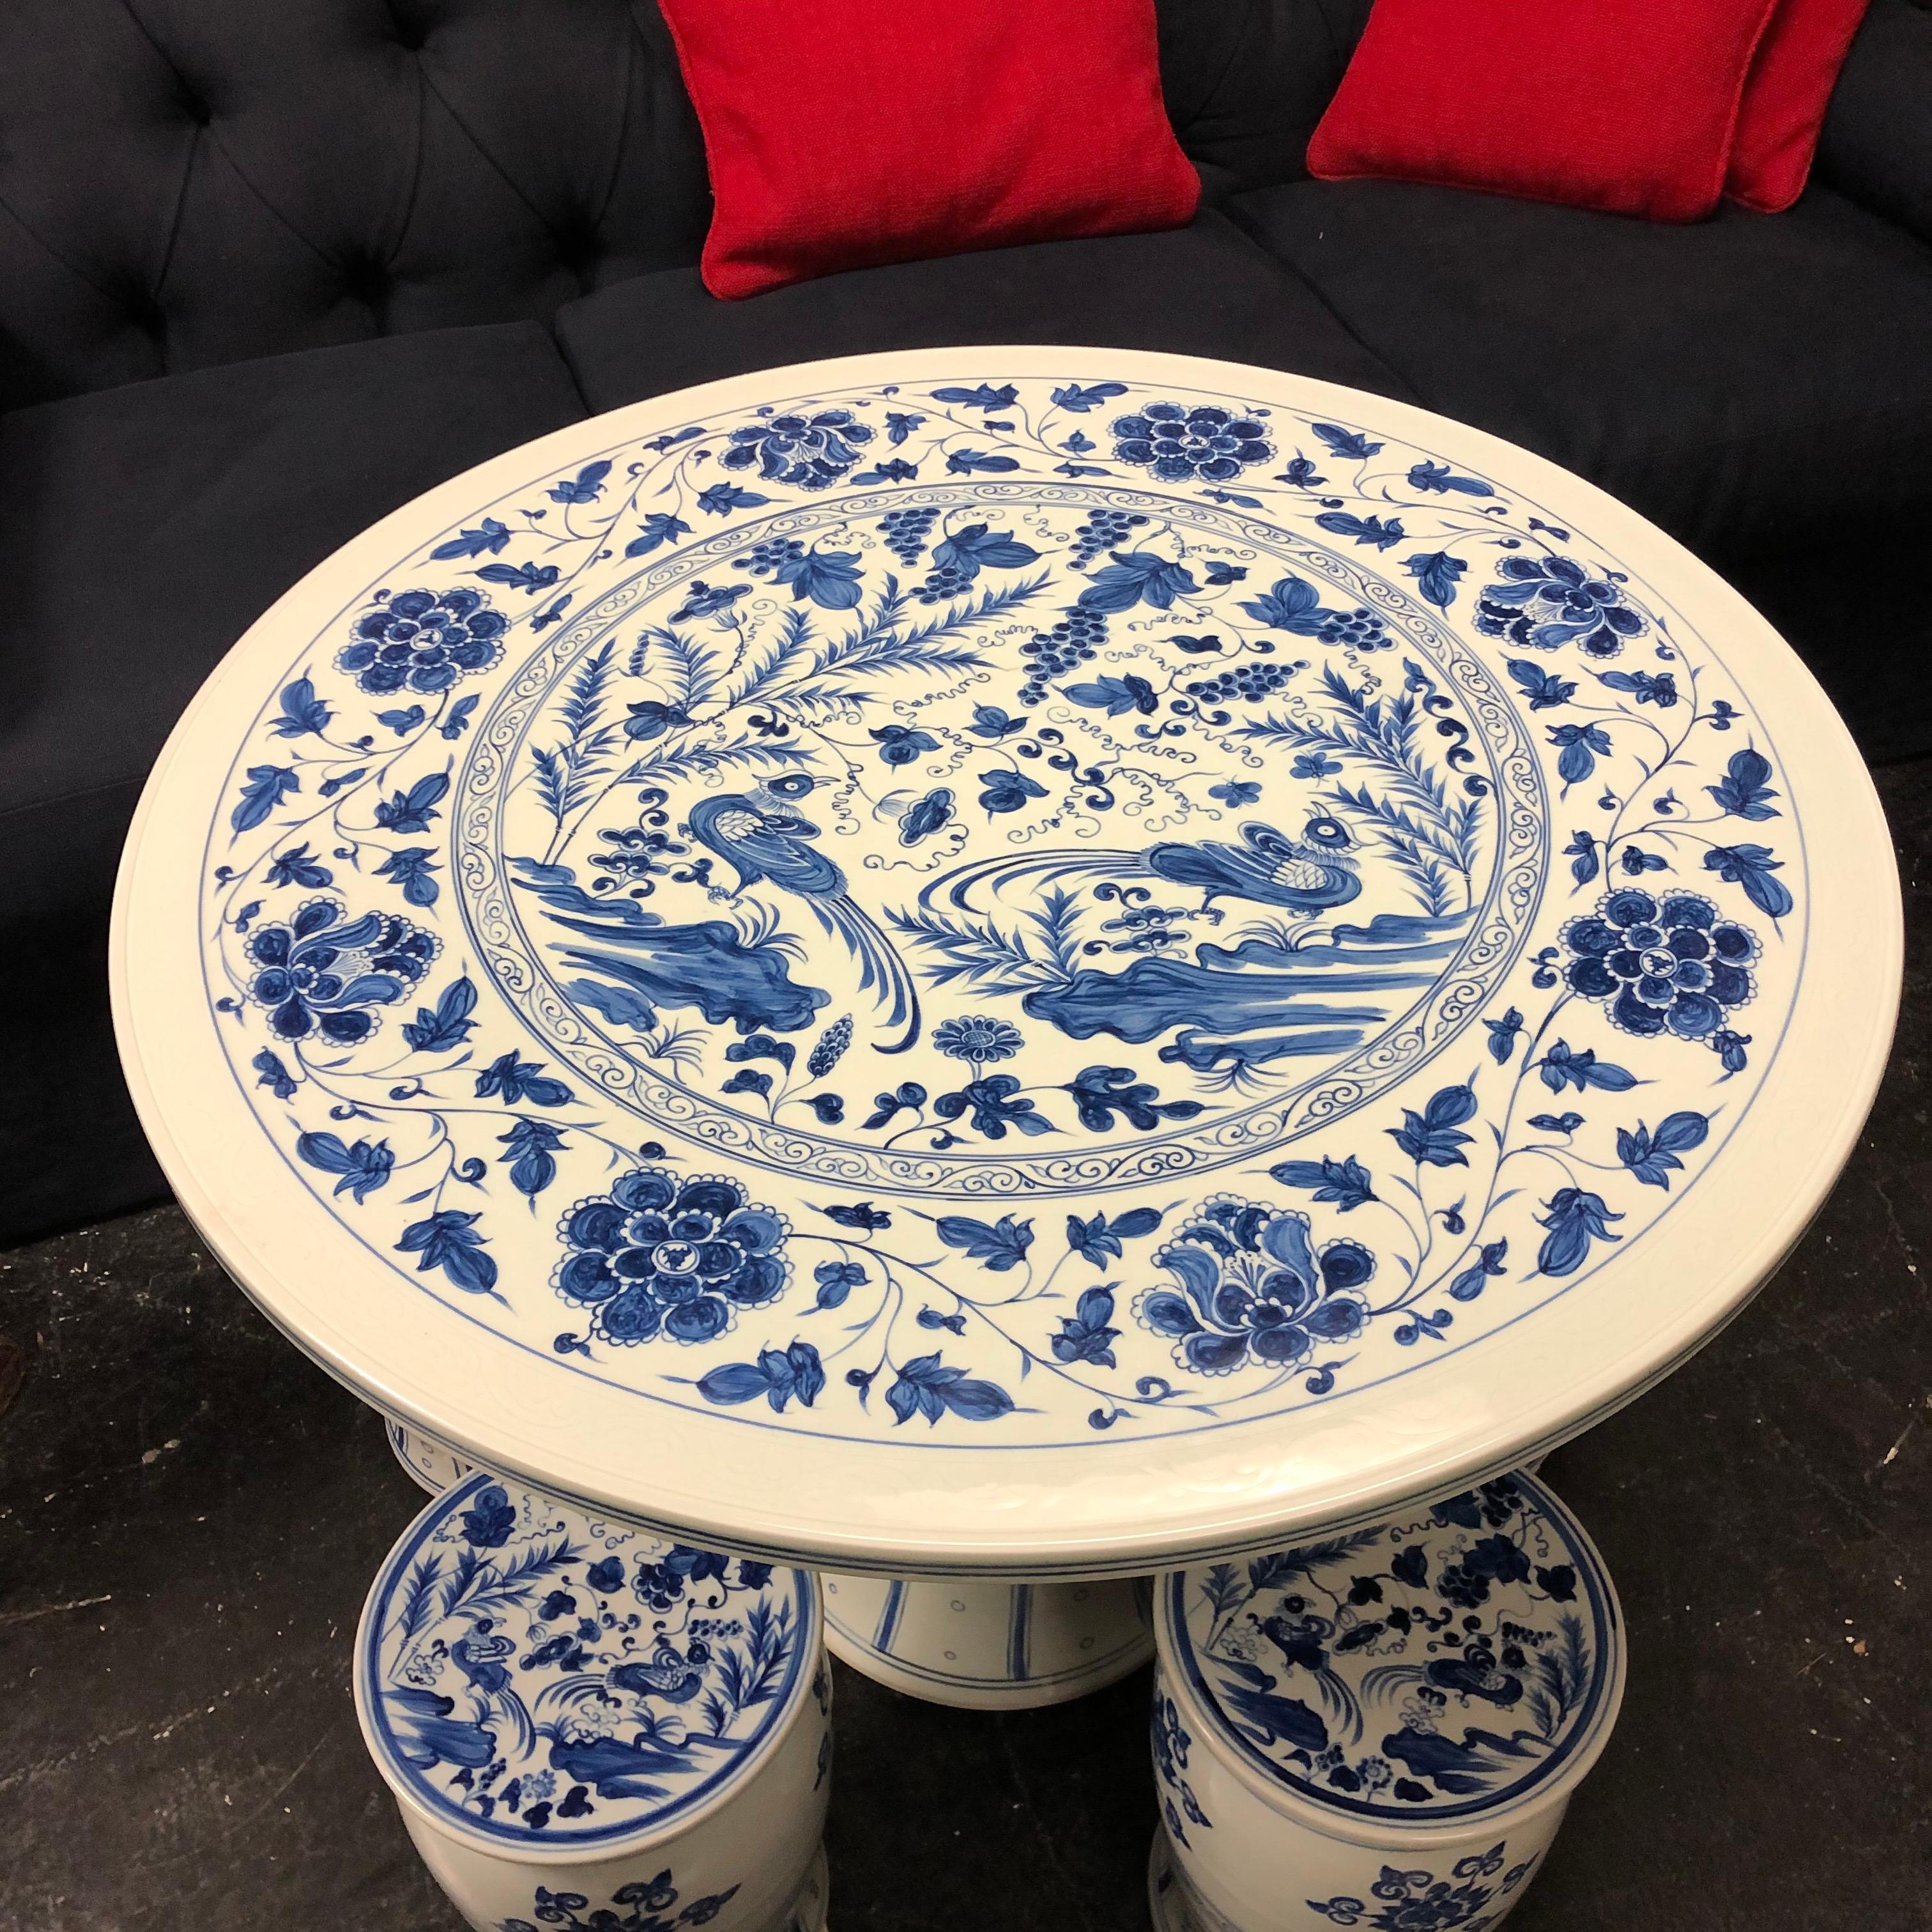 Chinese blue and white cafe table and four stools

Measures: Table 27.25